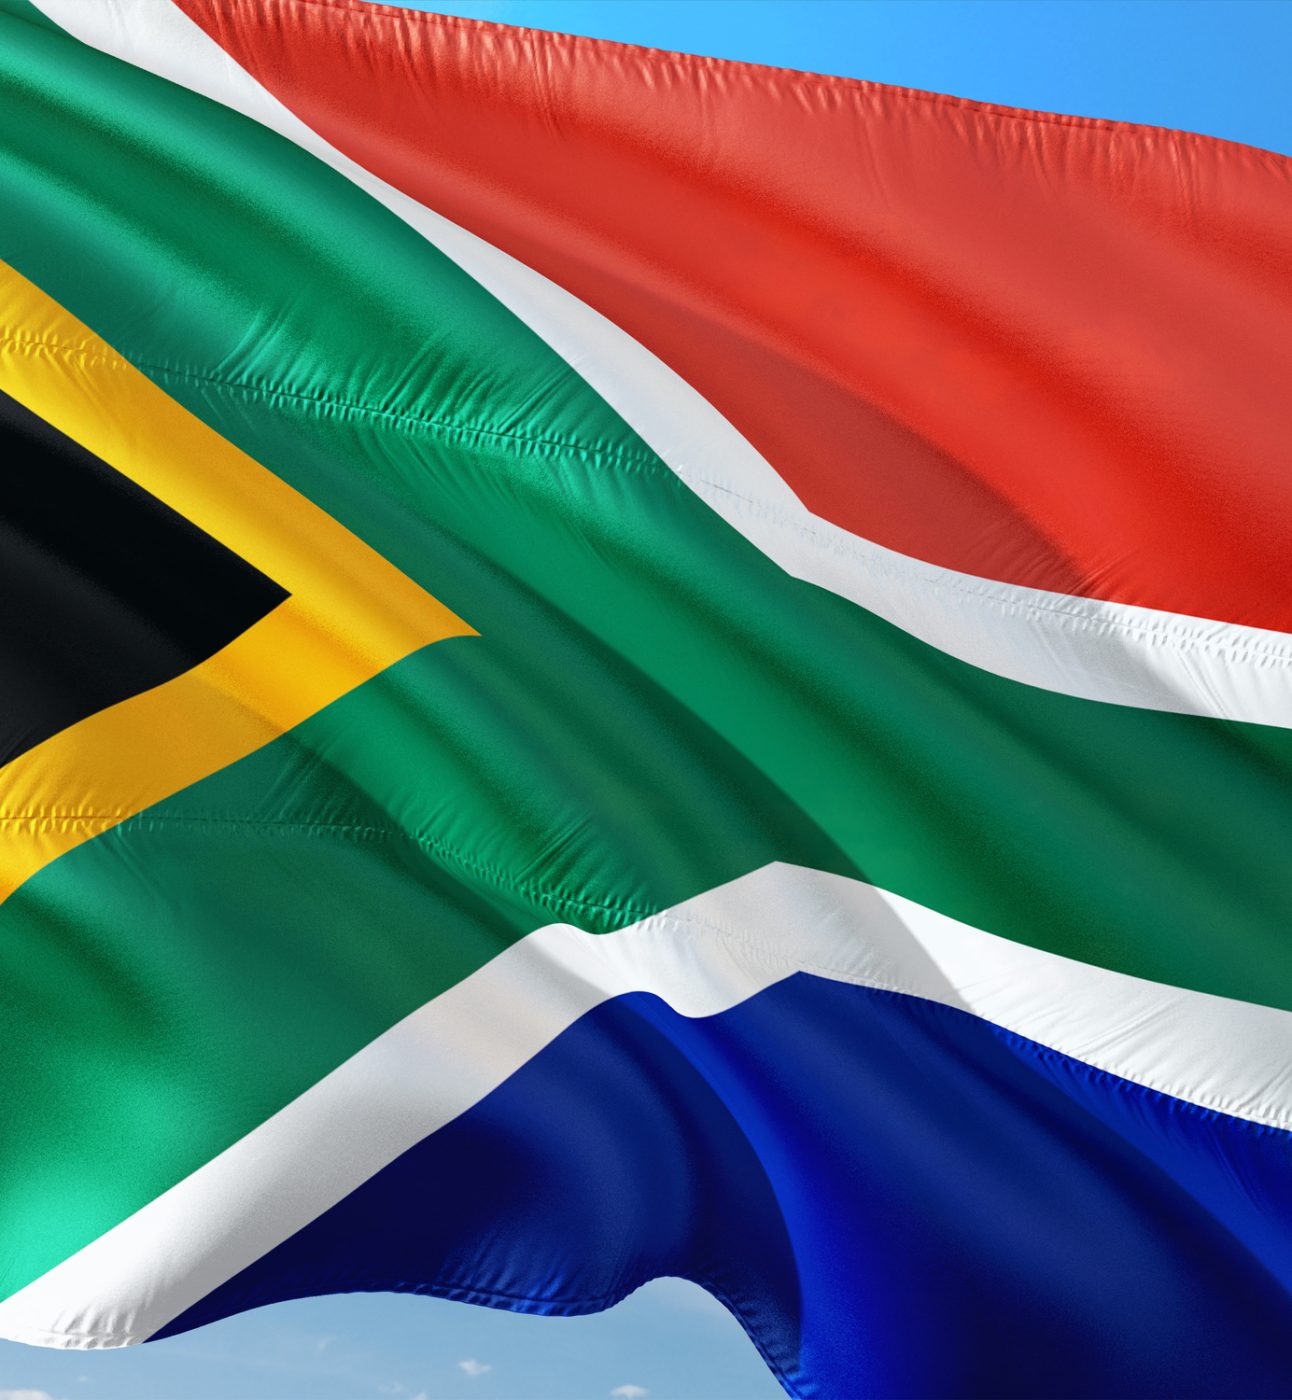 National Flag of South Africa